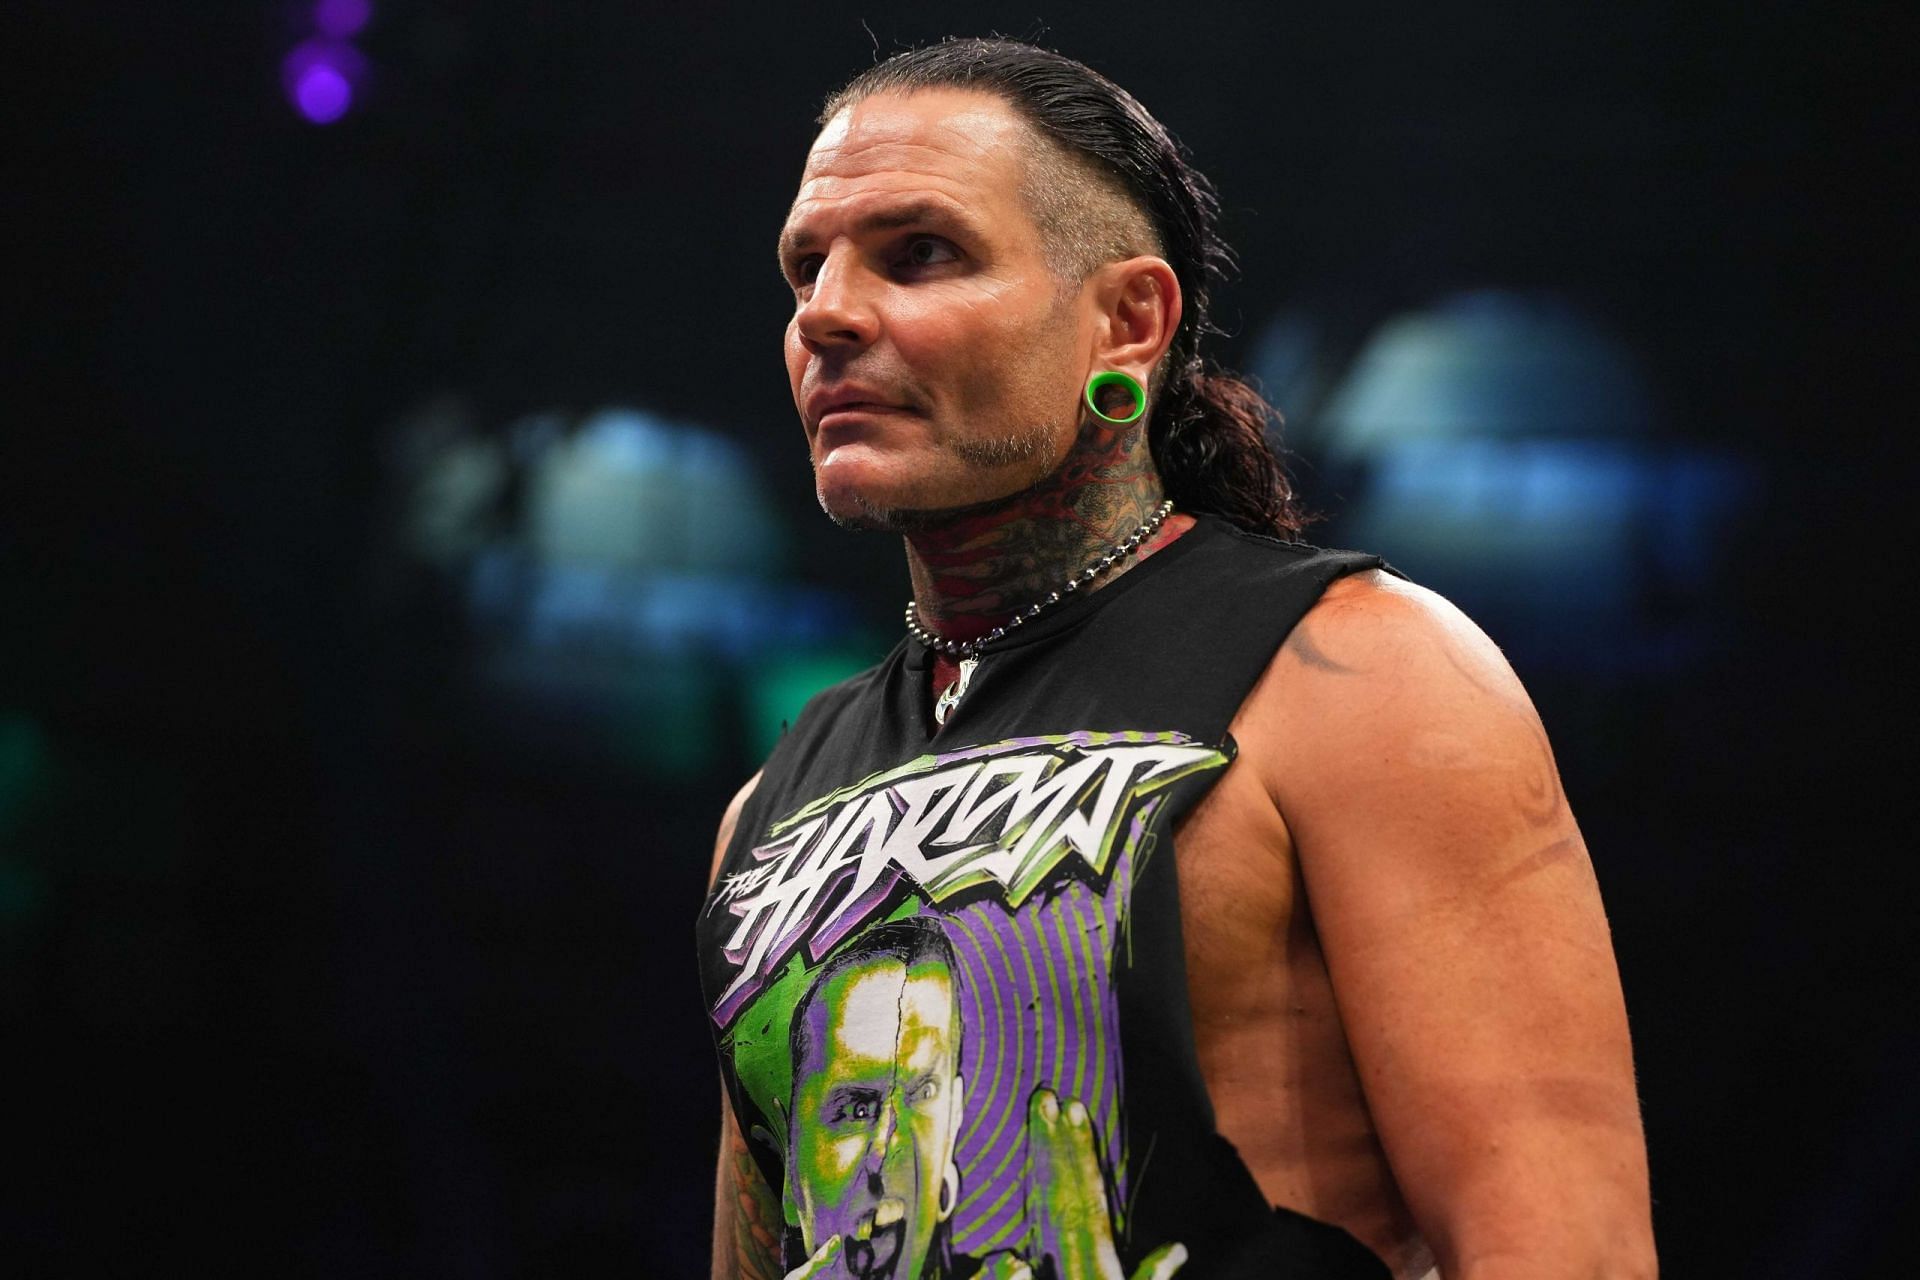 AEW star Jeff Hardy is undefeated in singles action.